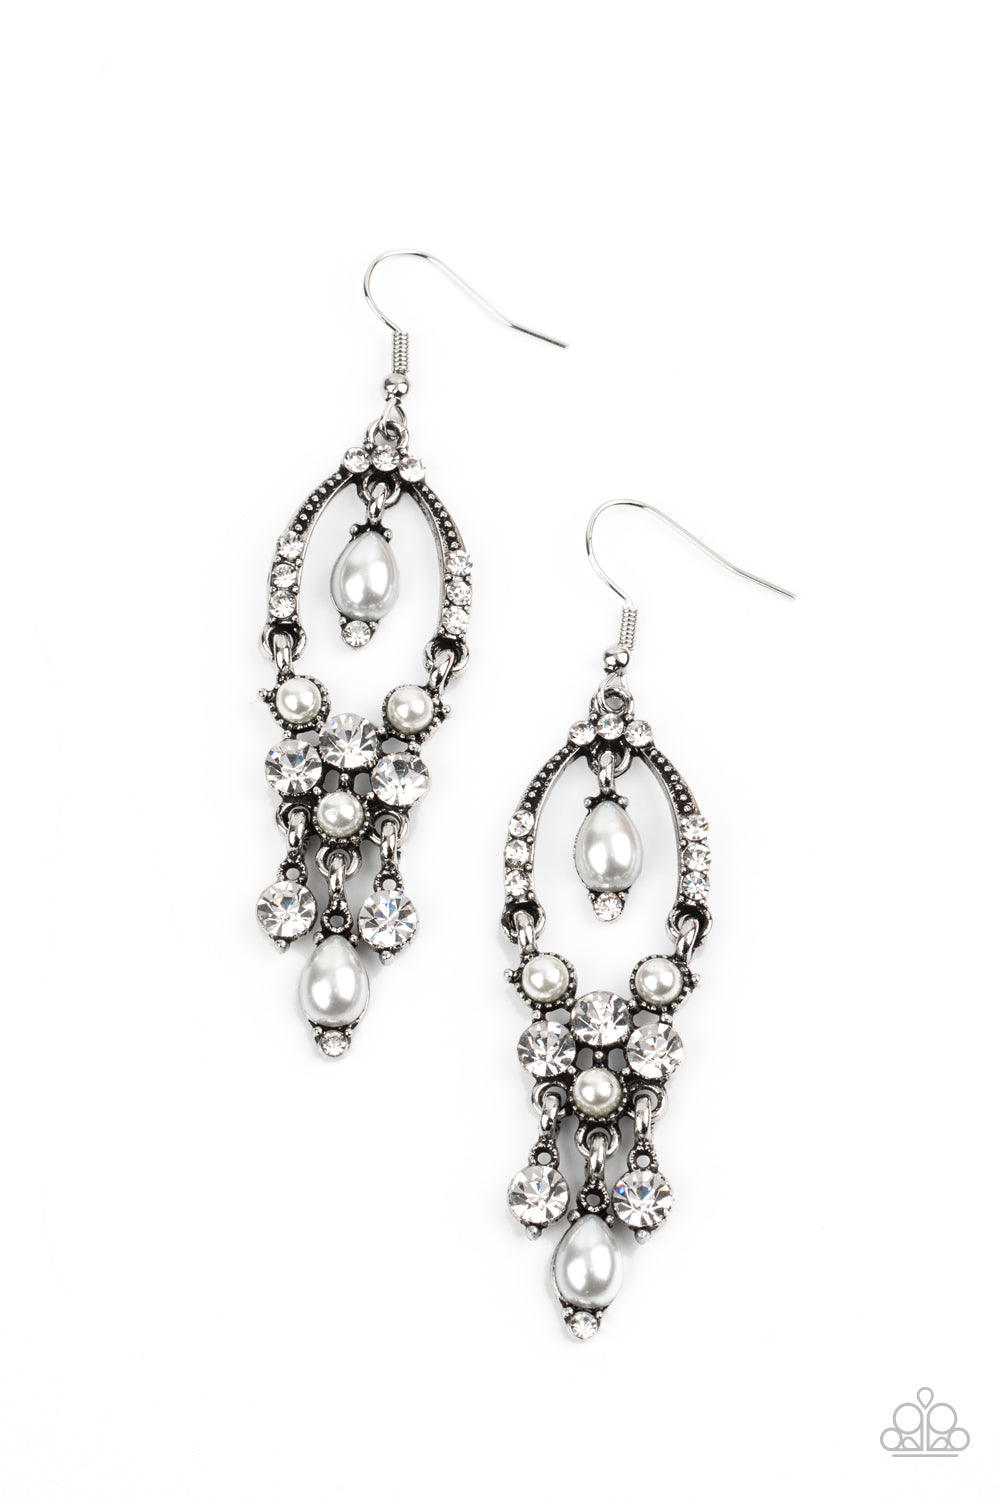 Back In The Spotlight - White - Glittery white rhinestones and pearly white beaded fittings delicately swing from the bottom of an ornately embellished oval frame. A matching pearly frame dangles from the top of the decorative silver frame, adding a timeless movement to the sparkly display. Earring attaches to a standard fishhook fitting.